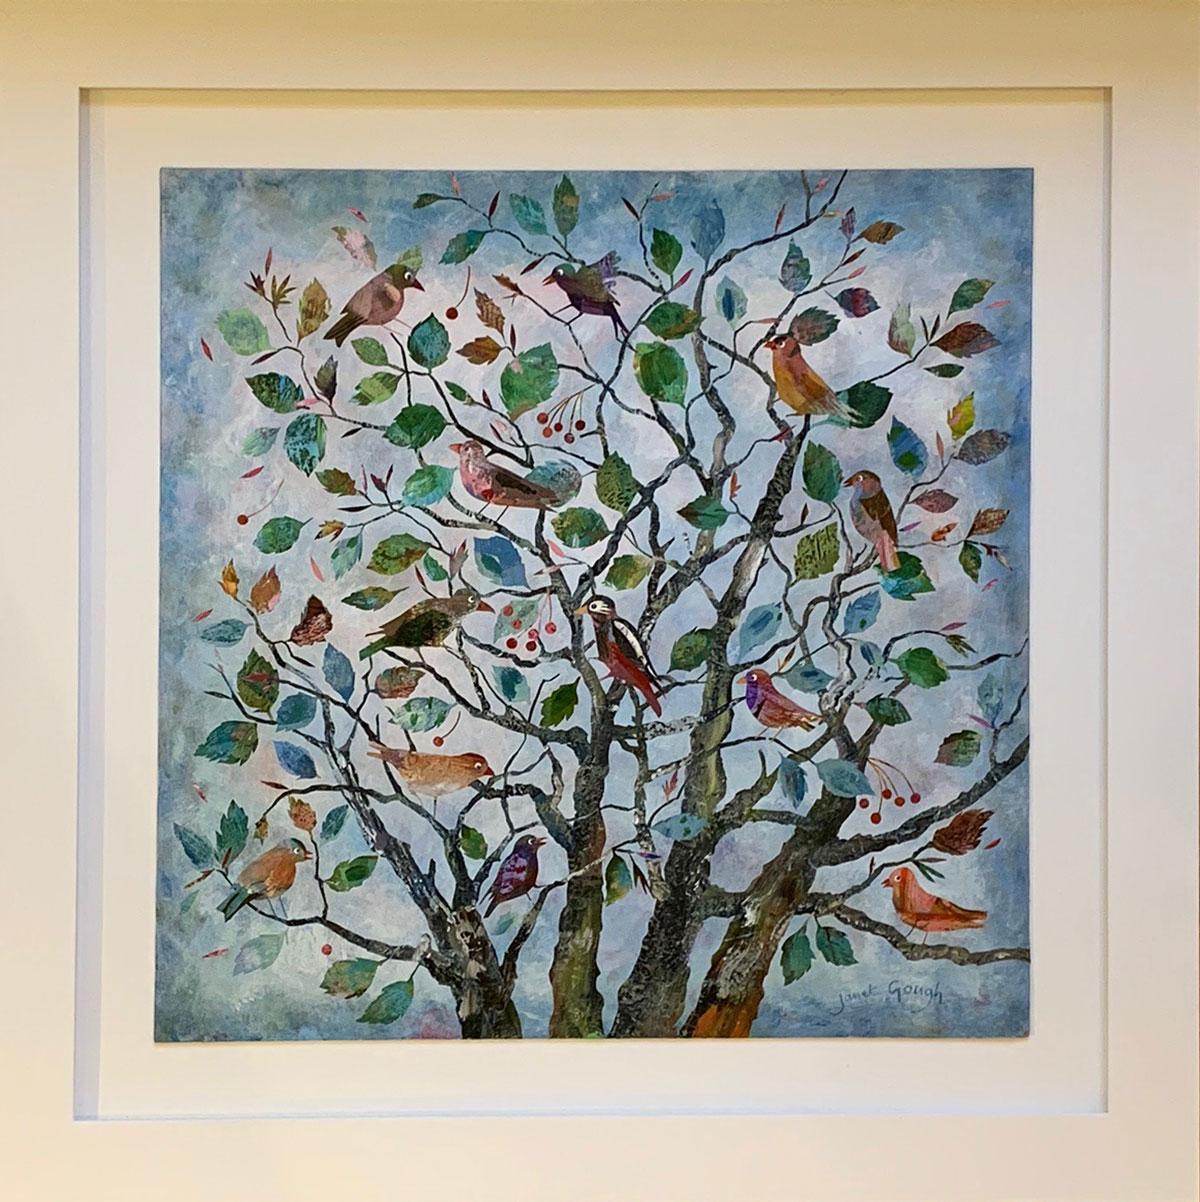 Family Tree - contemporary colorful mixed media floral bird painting on board - Painting by Janet Gough